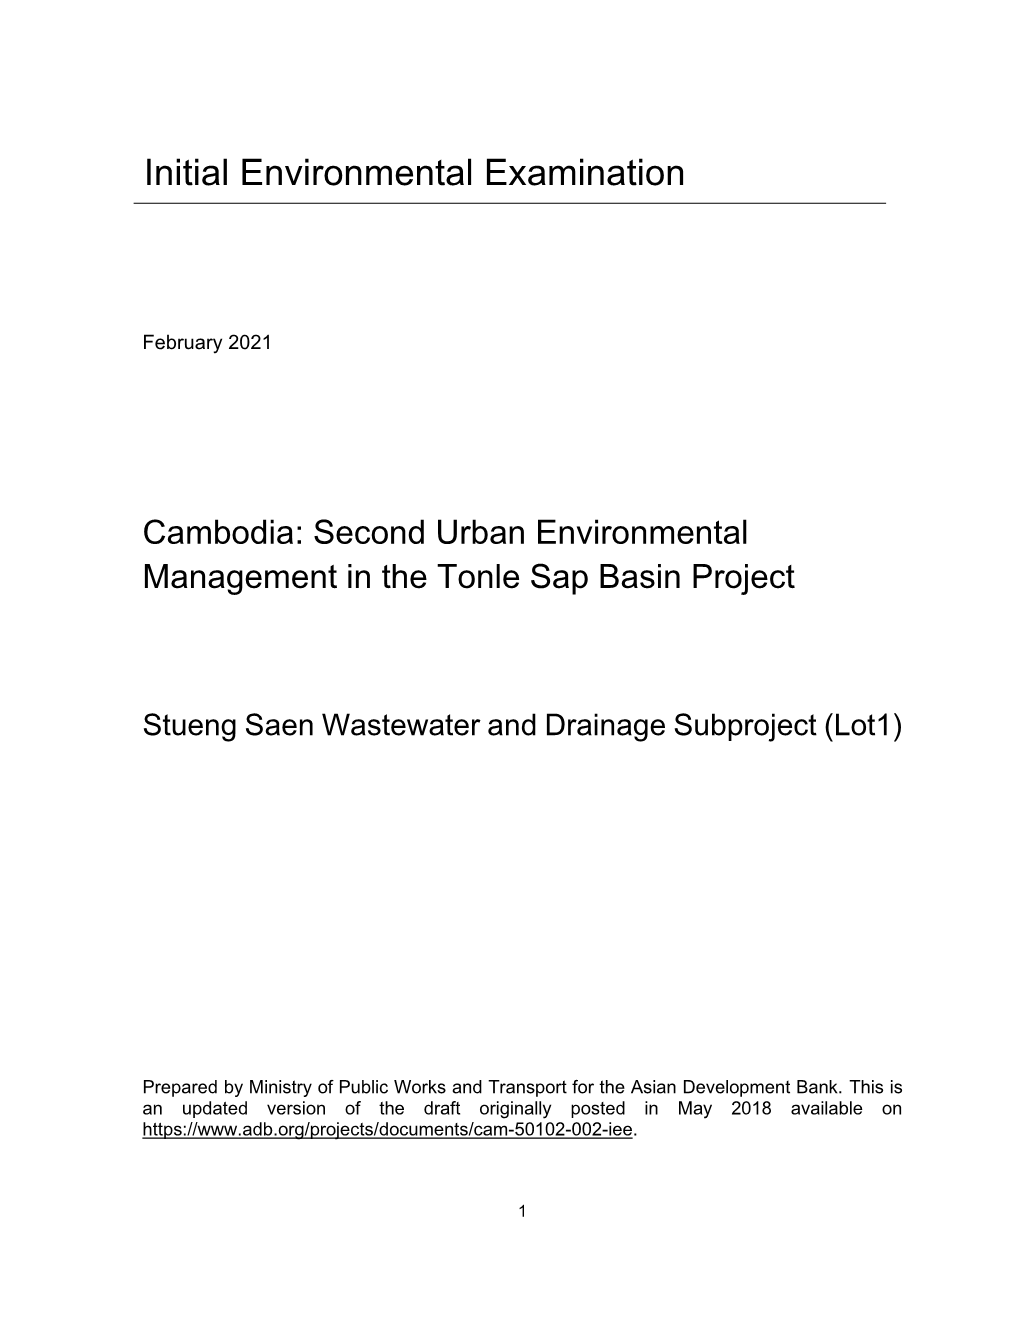 50102-002: Second Urban Environmental Management in The